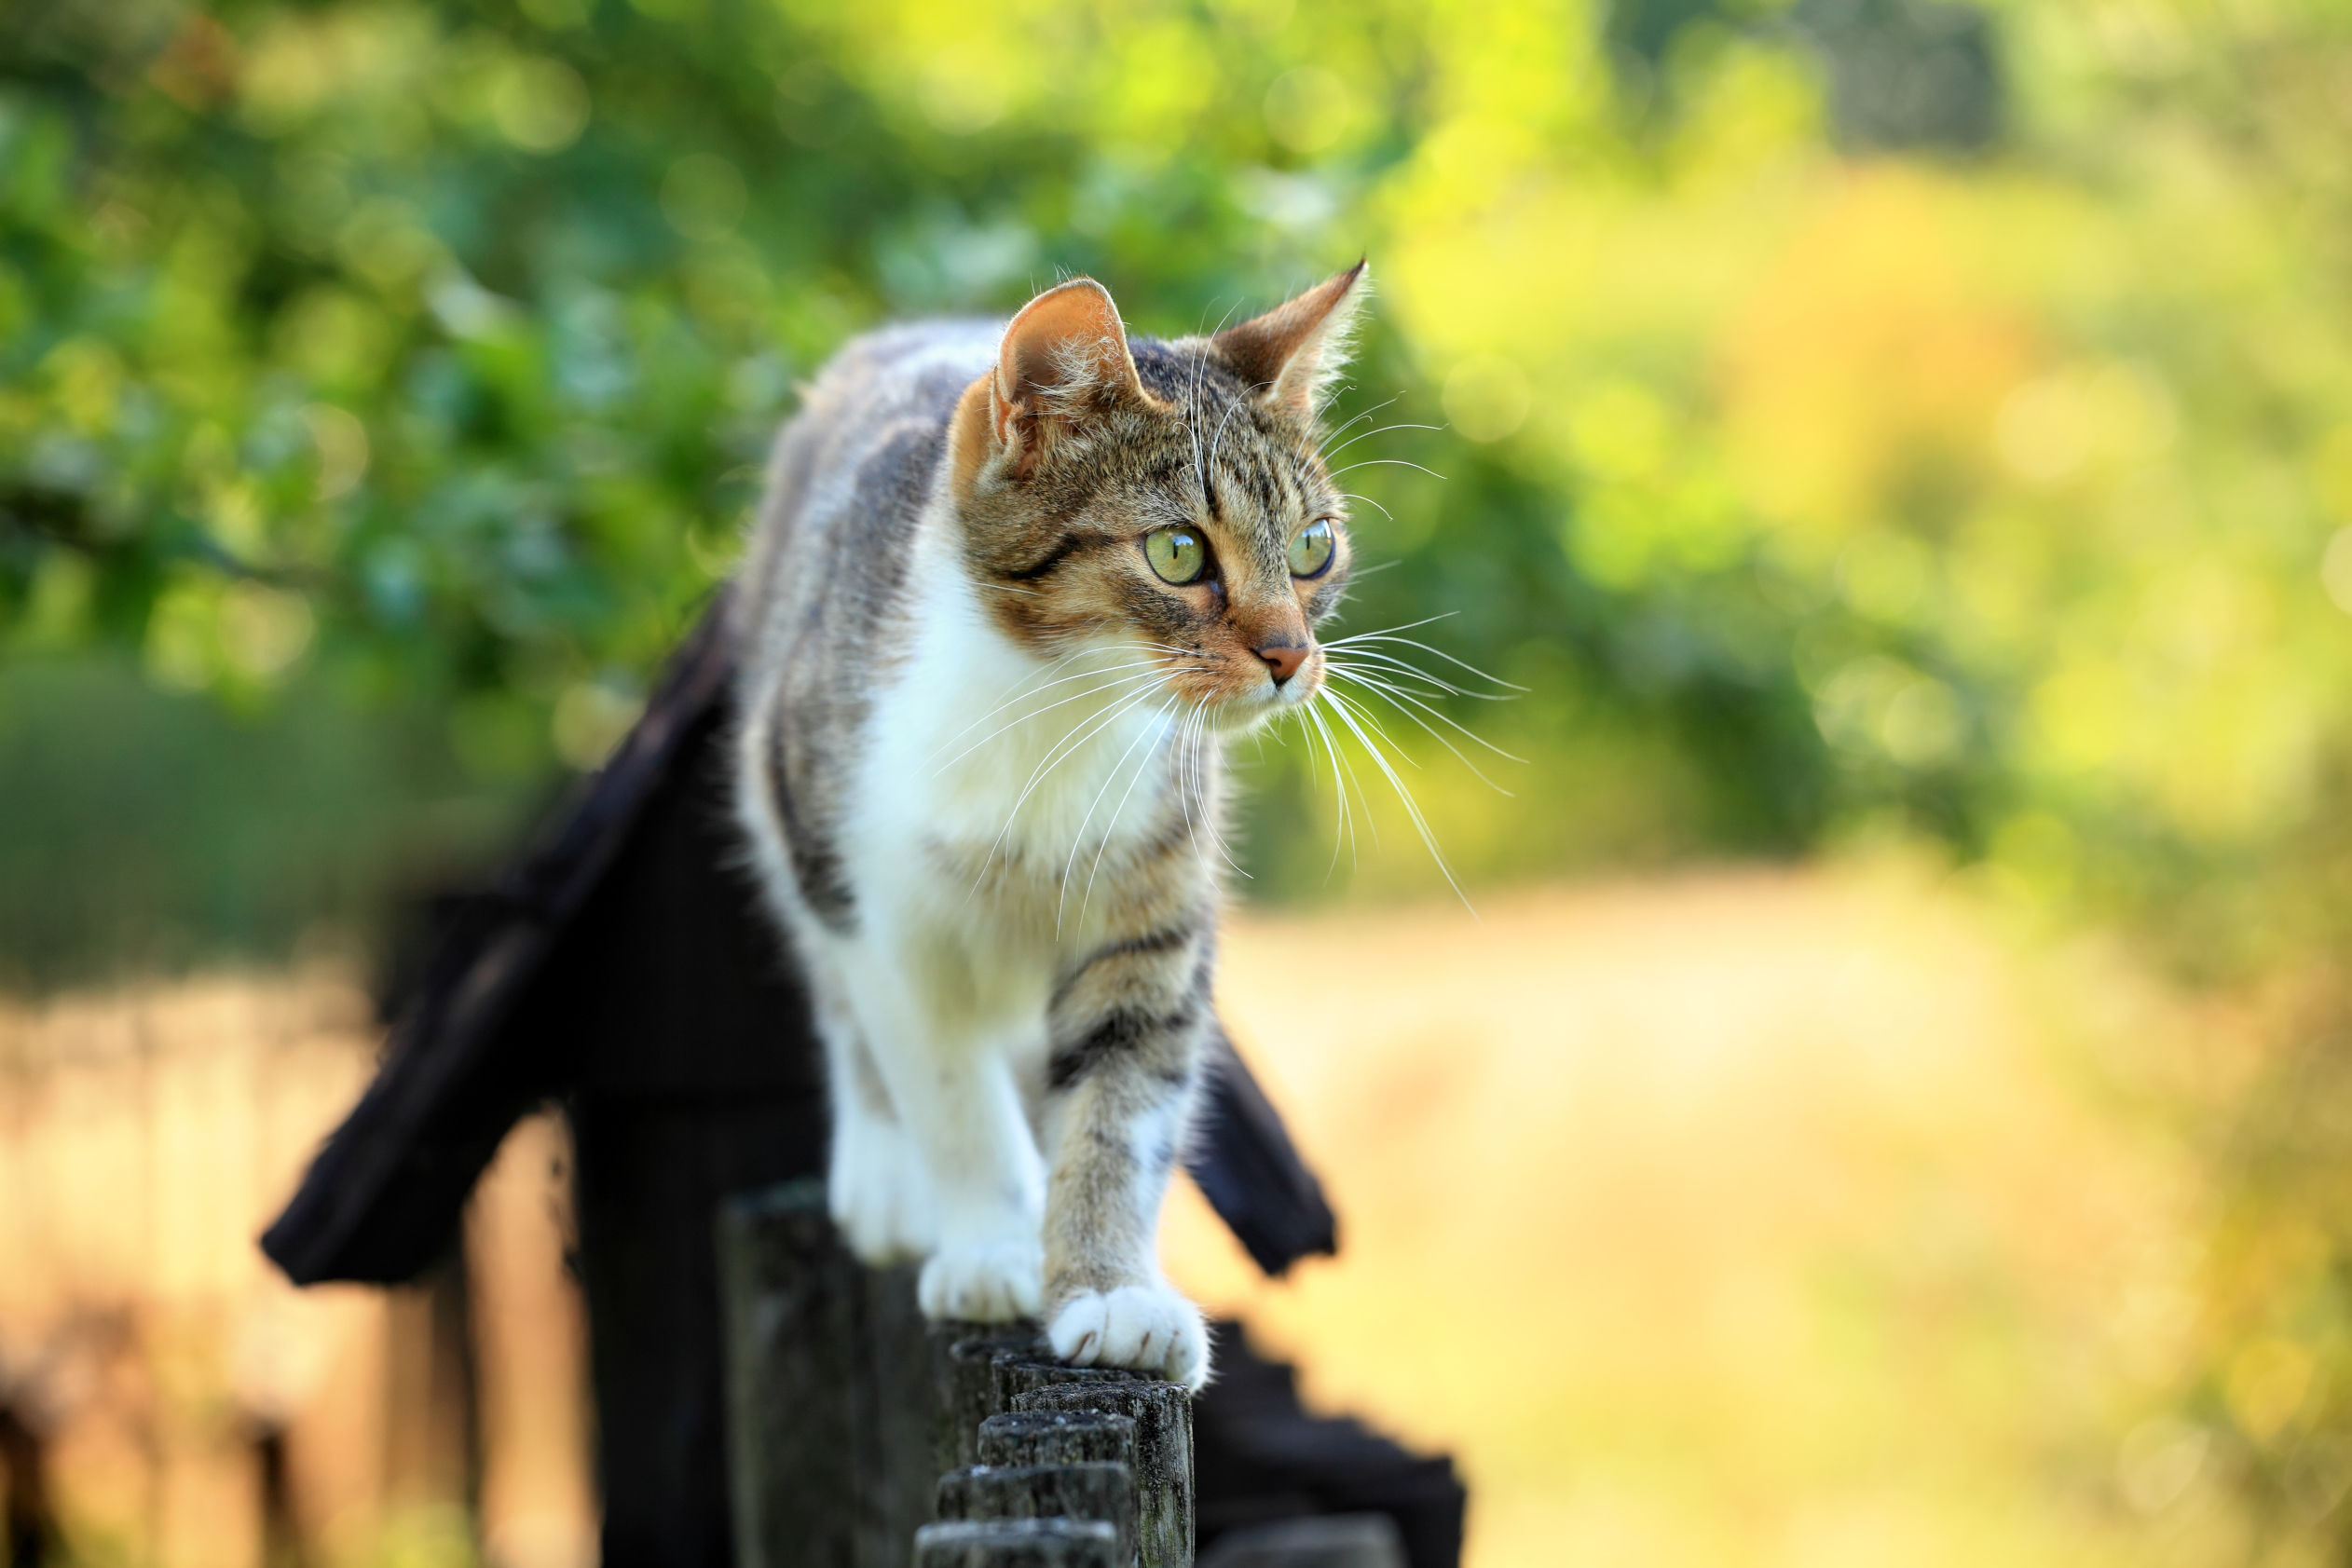  Cat on fence